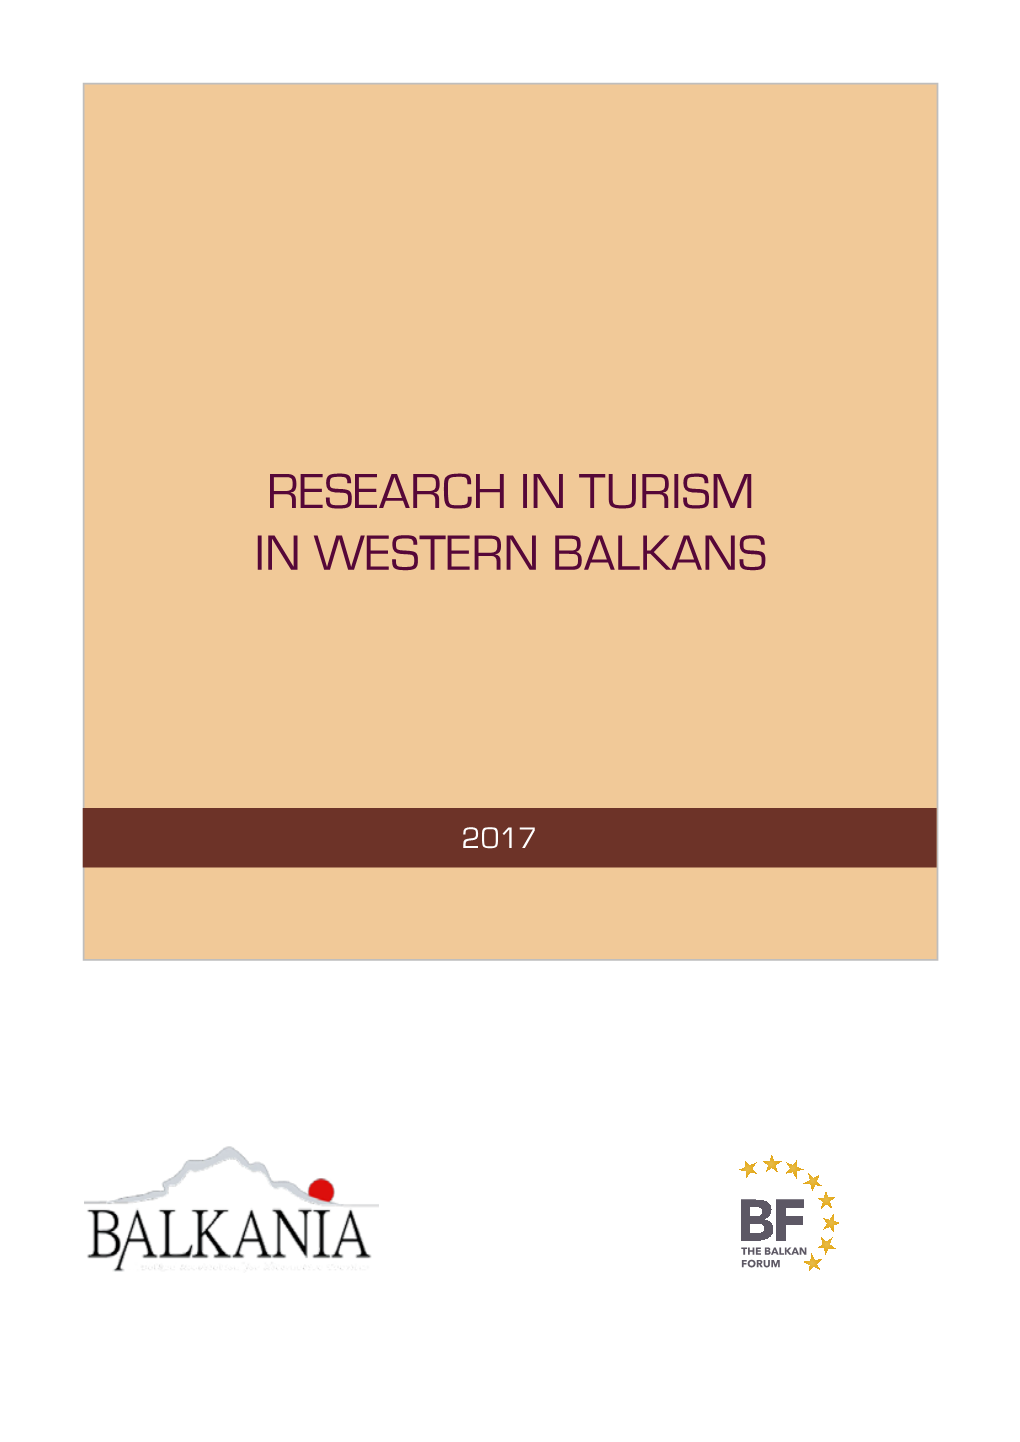 Research in Turism in Western Balkans